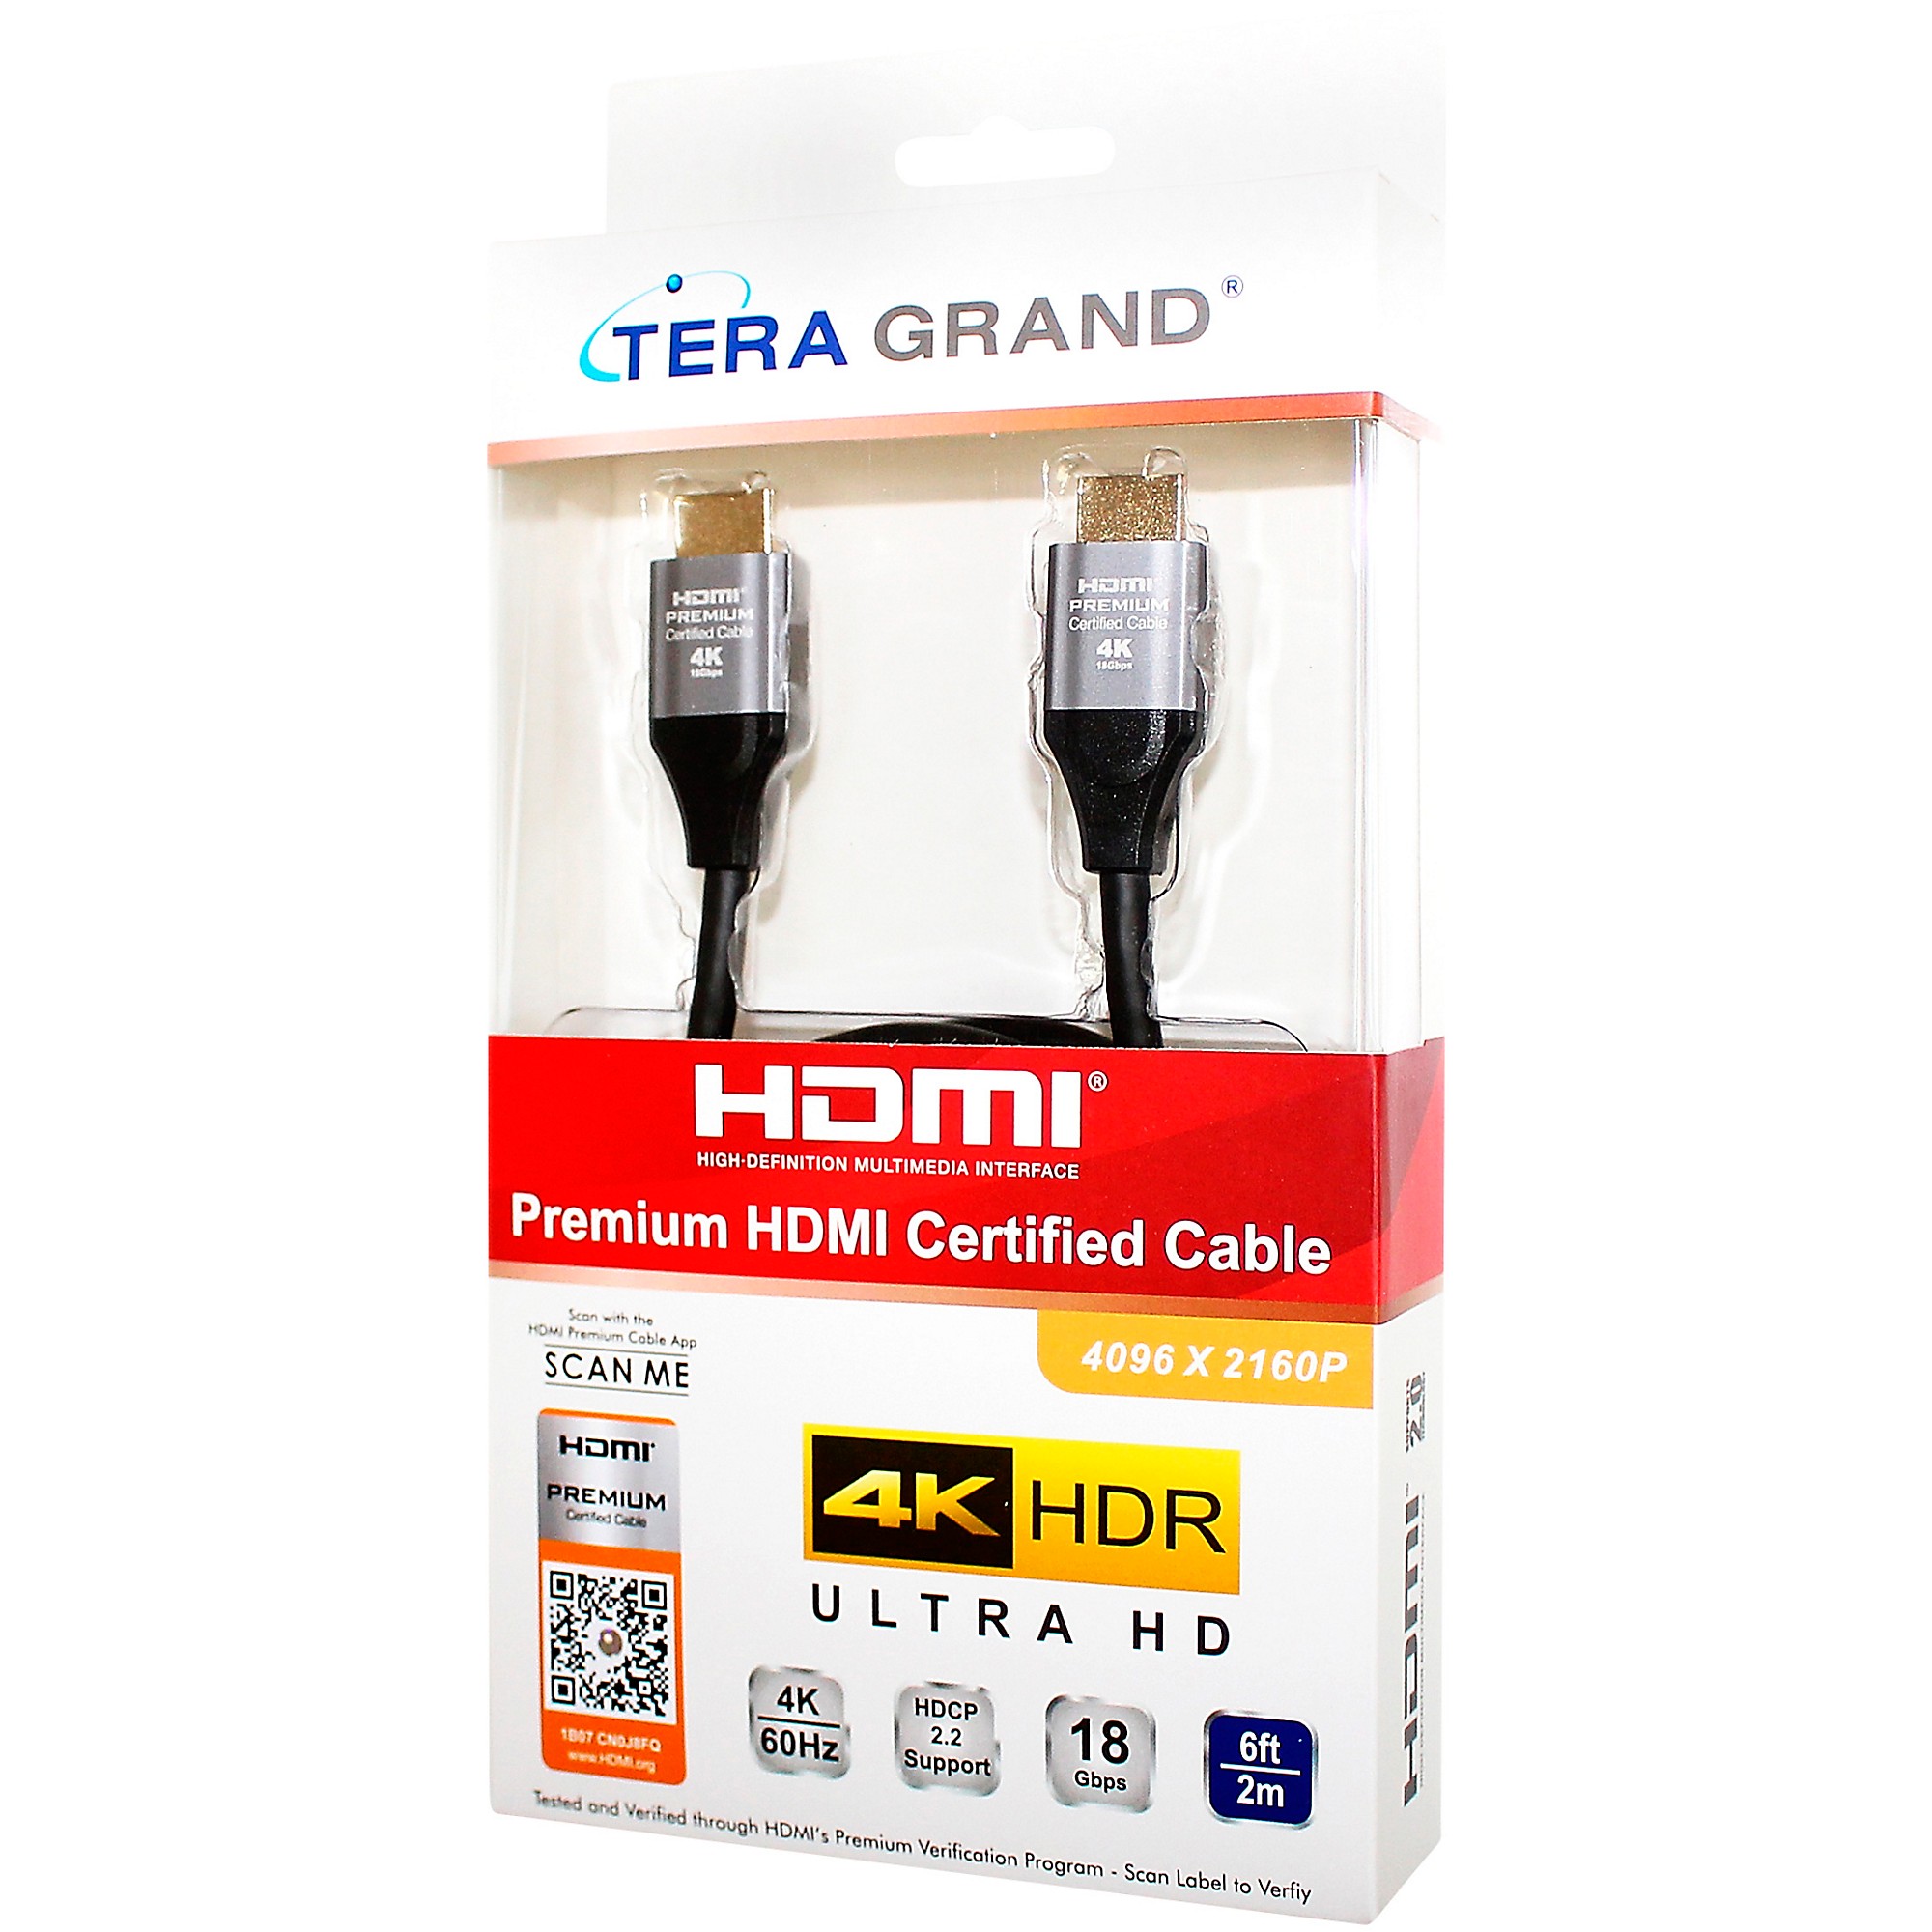 Premium HDMI Certified 2.0 Cable with Aluminum housing, Supports 4K HDR  UltraHD, 18 Gbps, 4K/60Hz, 6 Feet ( 2 meter) — Tera Grand